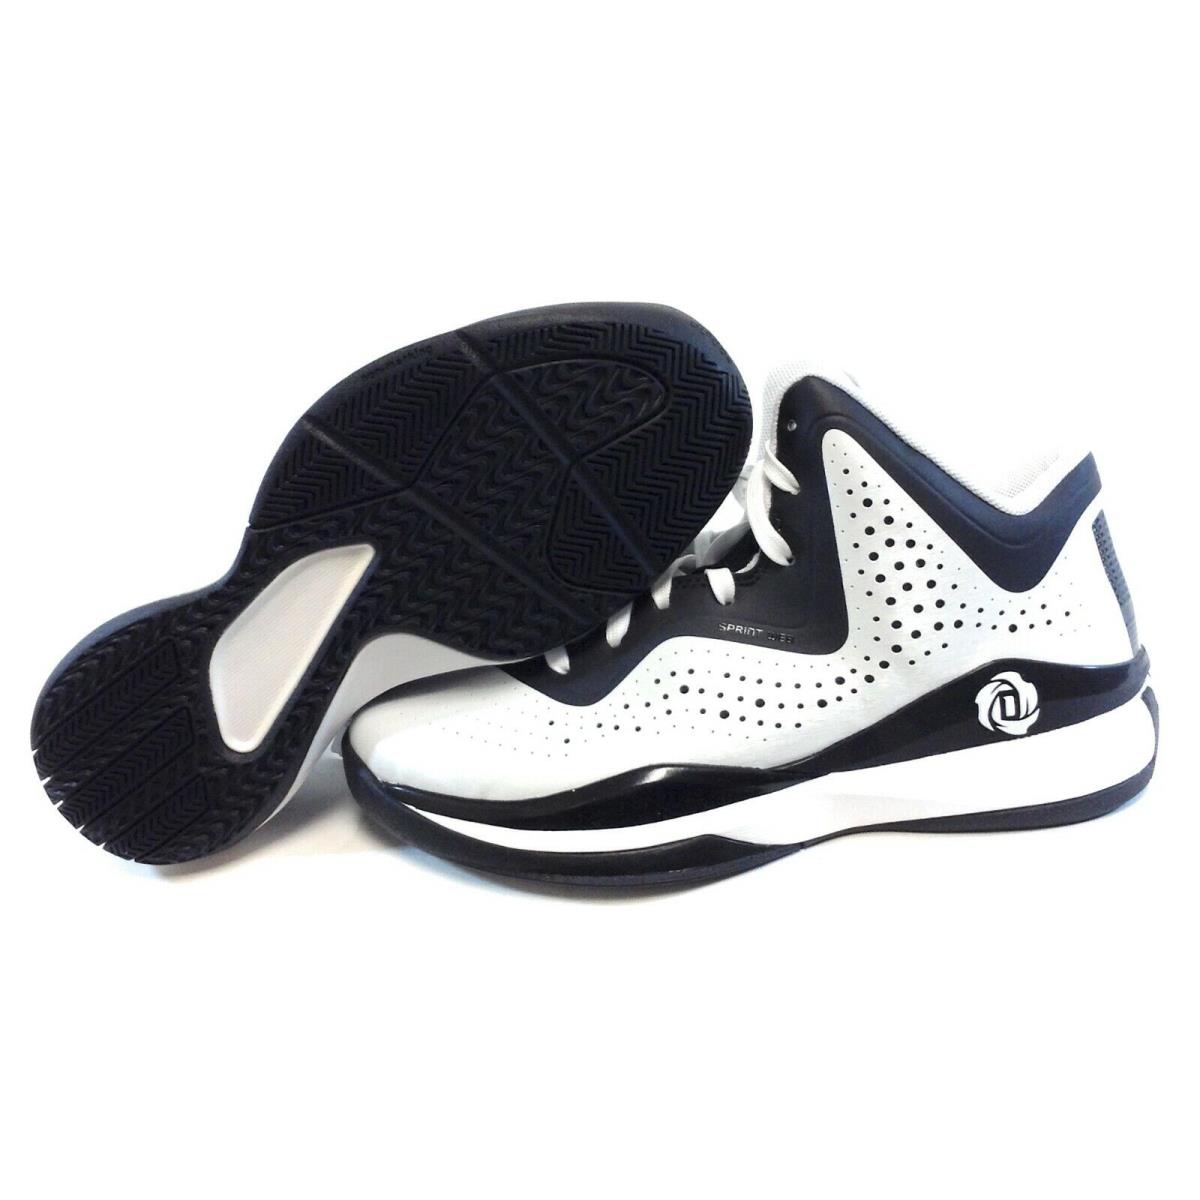 Youth Boys Kids Adidas D Rose 773 Iii C77292 White Black 2014 DS Sneakers Shoes